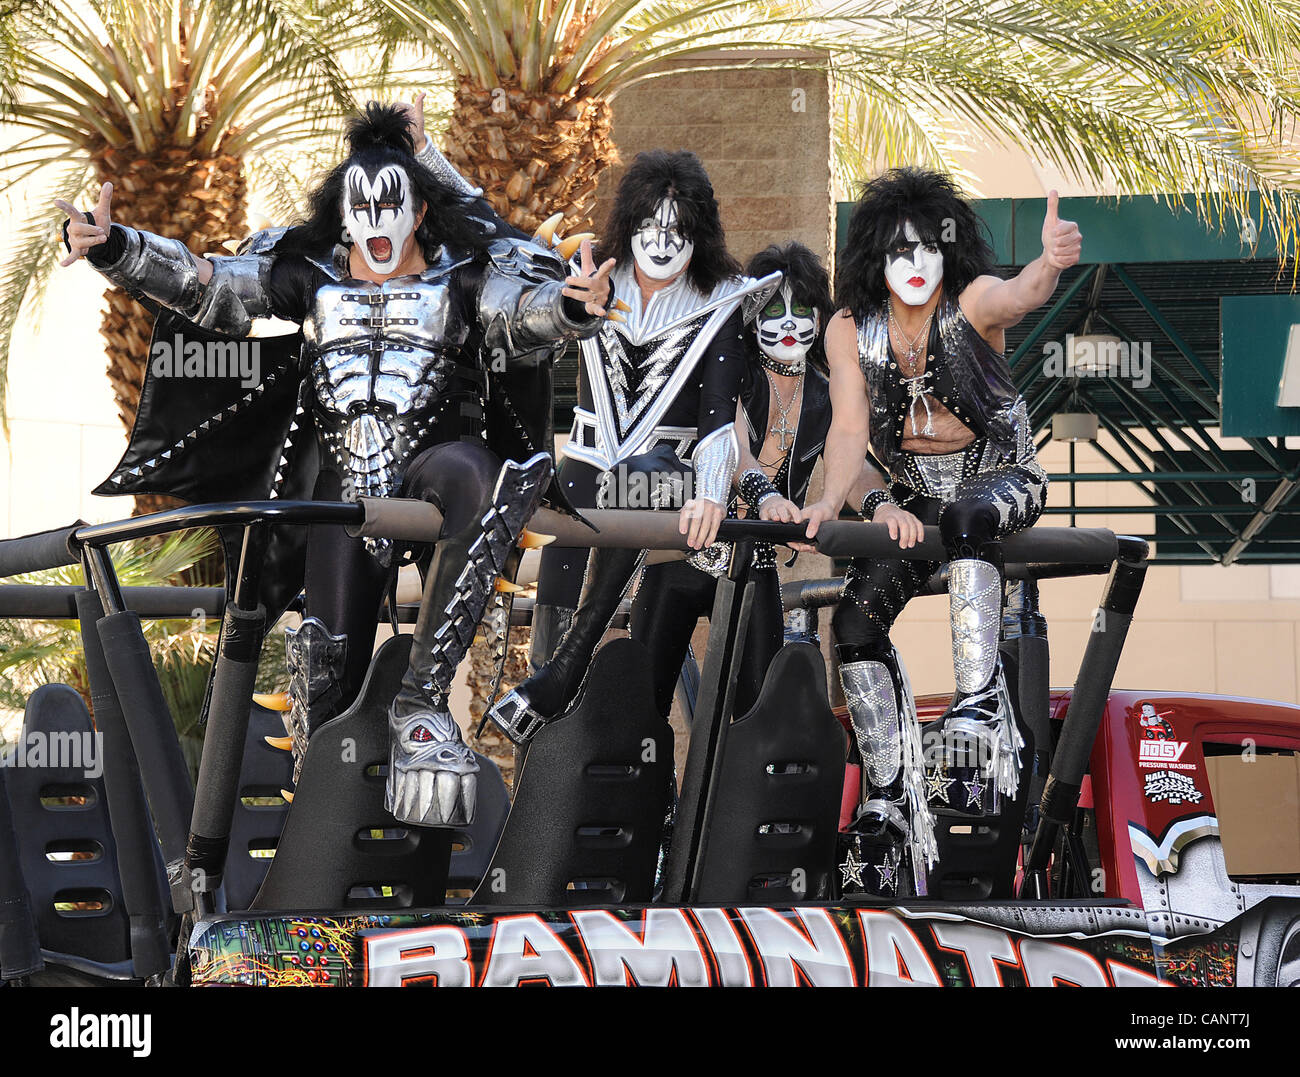 Apr. 1, 2012 - Las Vegas, Nevada; USA - Musicians GENE SIMMONS, ERIC SINGER, TOMMY THAYER and PAUL STANLEY of the band KISS arrives on the red carpet at the 47th Annual Academy of Country Music Awards that is taking place at the MGM Grand Hotel & Casino Grand Garden Arena located in Las Vegas.  Copy Stock Photo